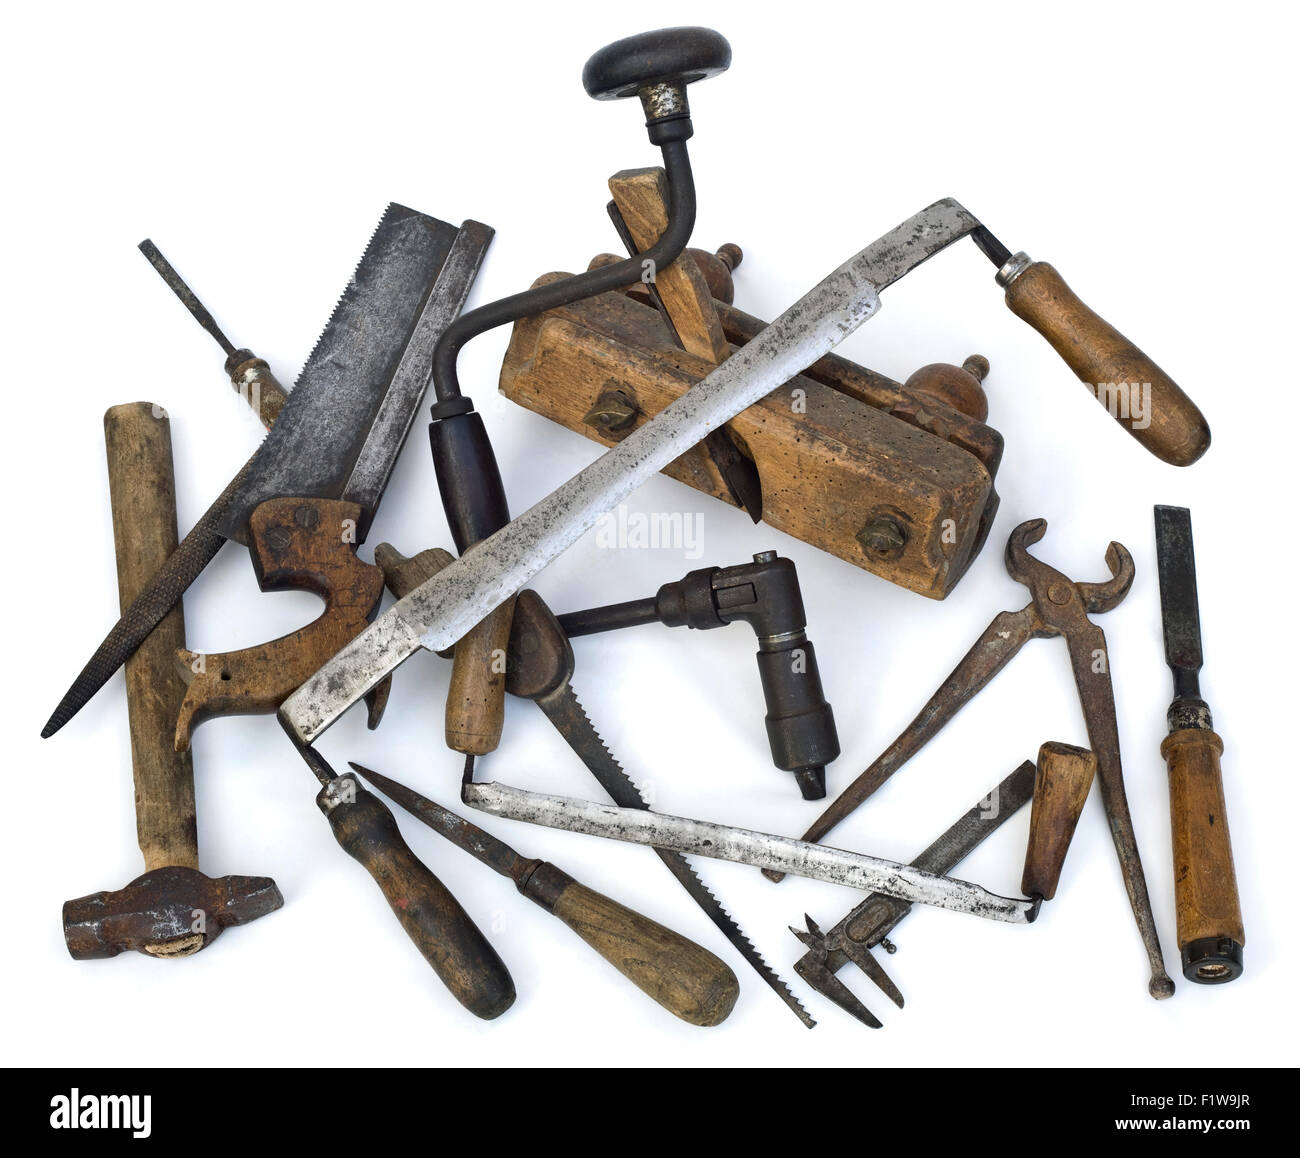 Pile of Old Carpenter Tools Stock Photo